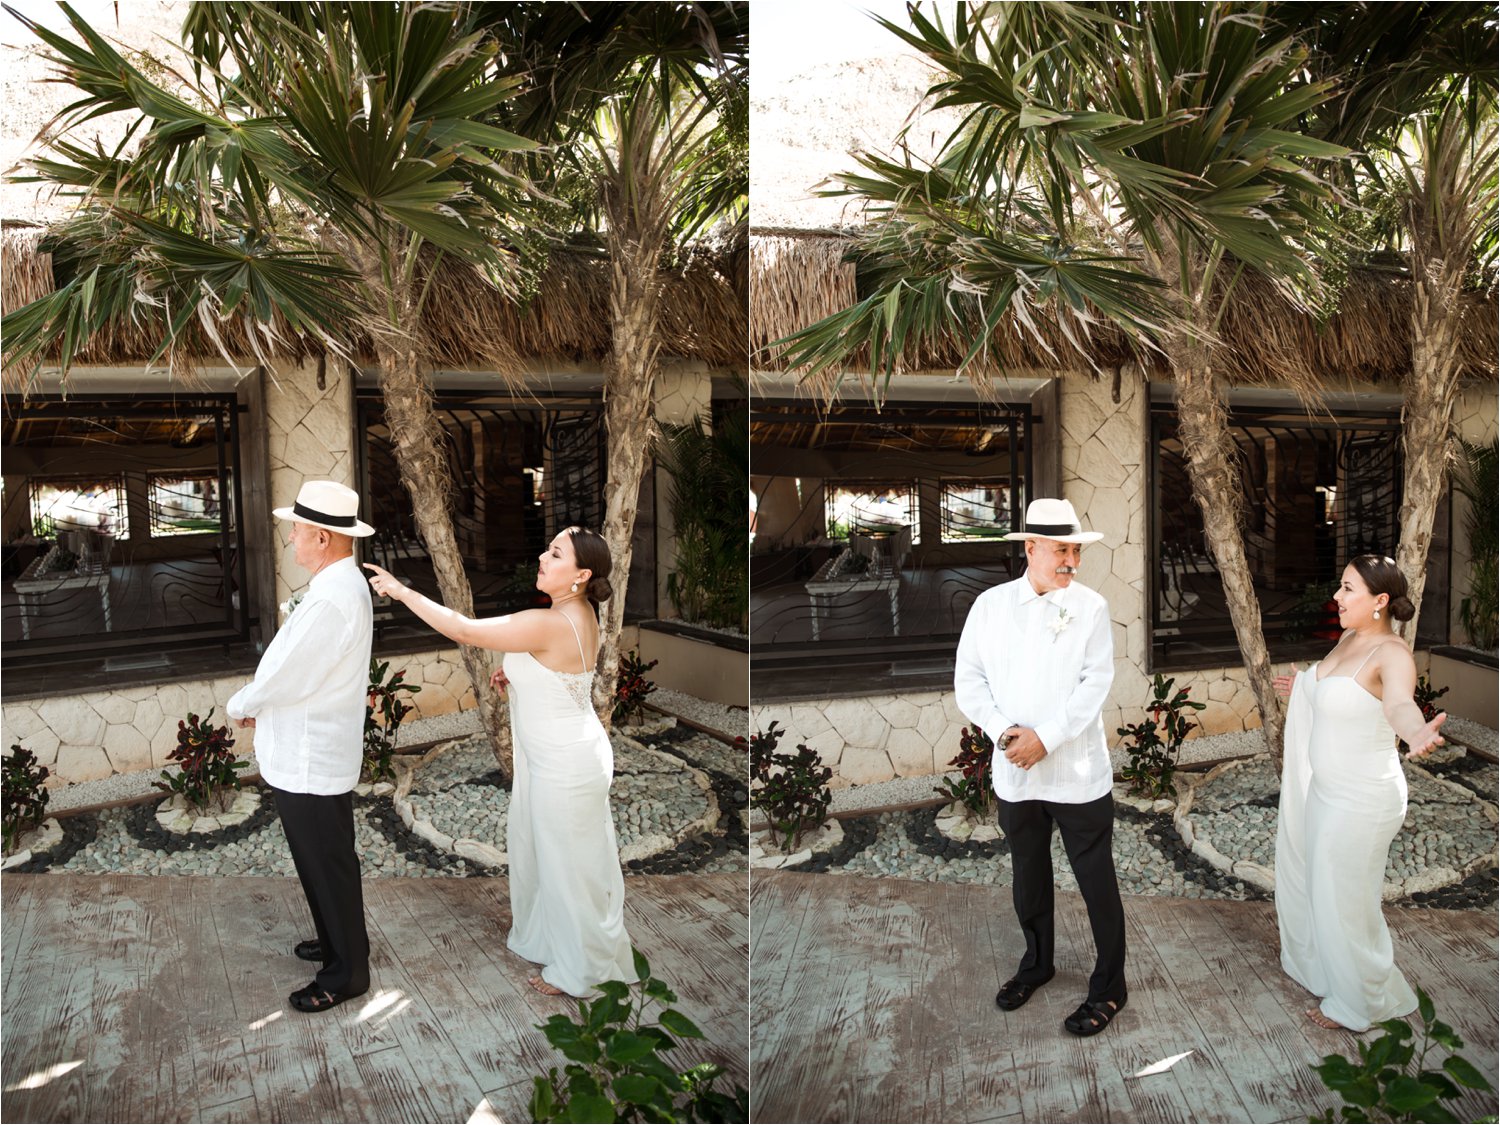  images by feliciathephotographer.com | destination wedding photographer | mexico | tropical | fiji | venue | azul beach resort | riviera maya | pre-ceremony | first look with father | palm trees | white suit | long lace train | family | oceanside | 